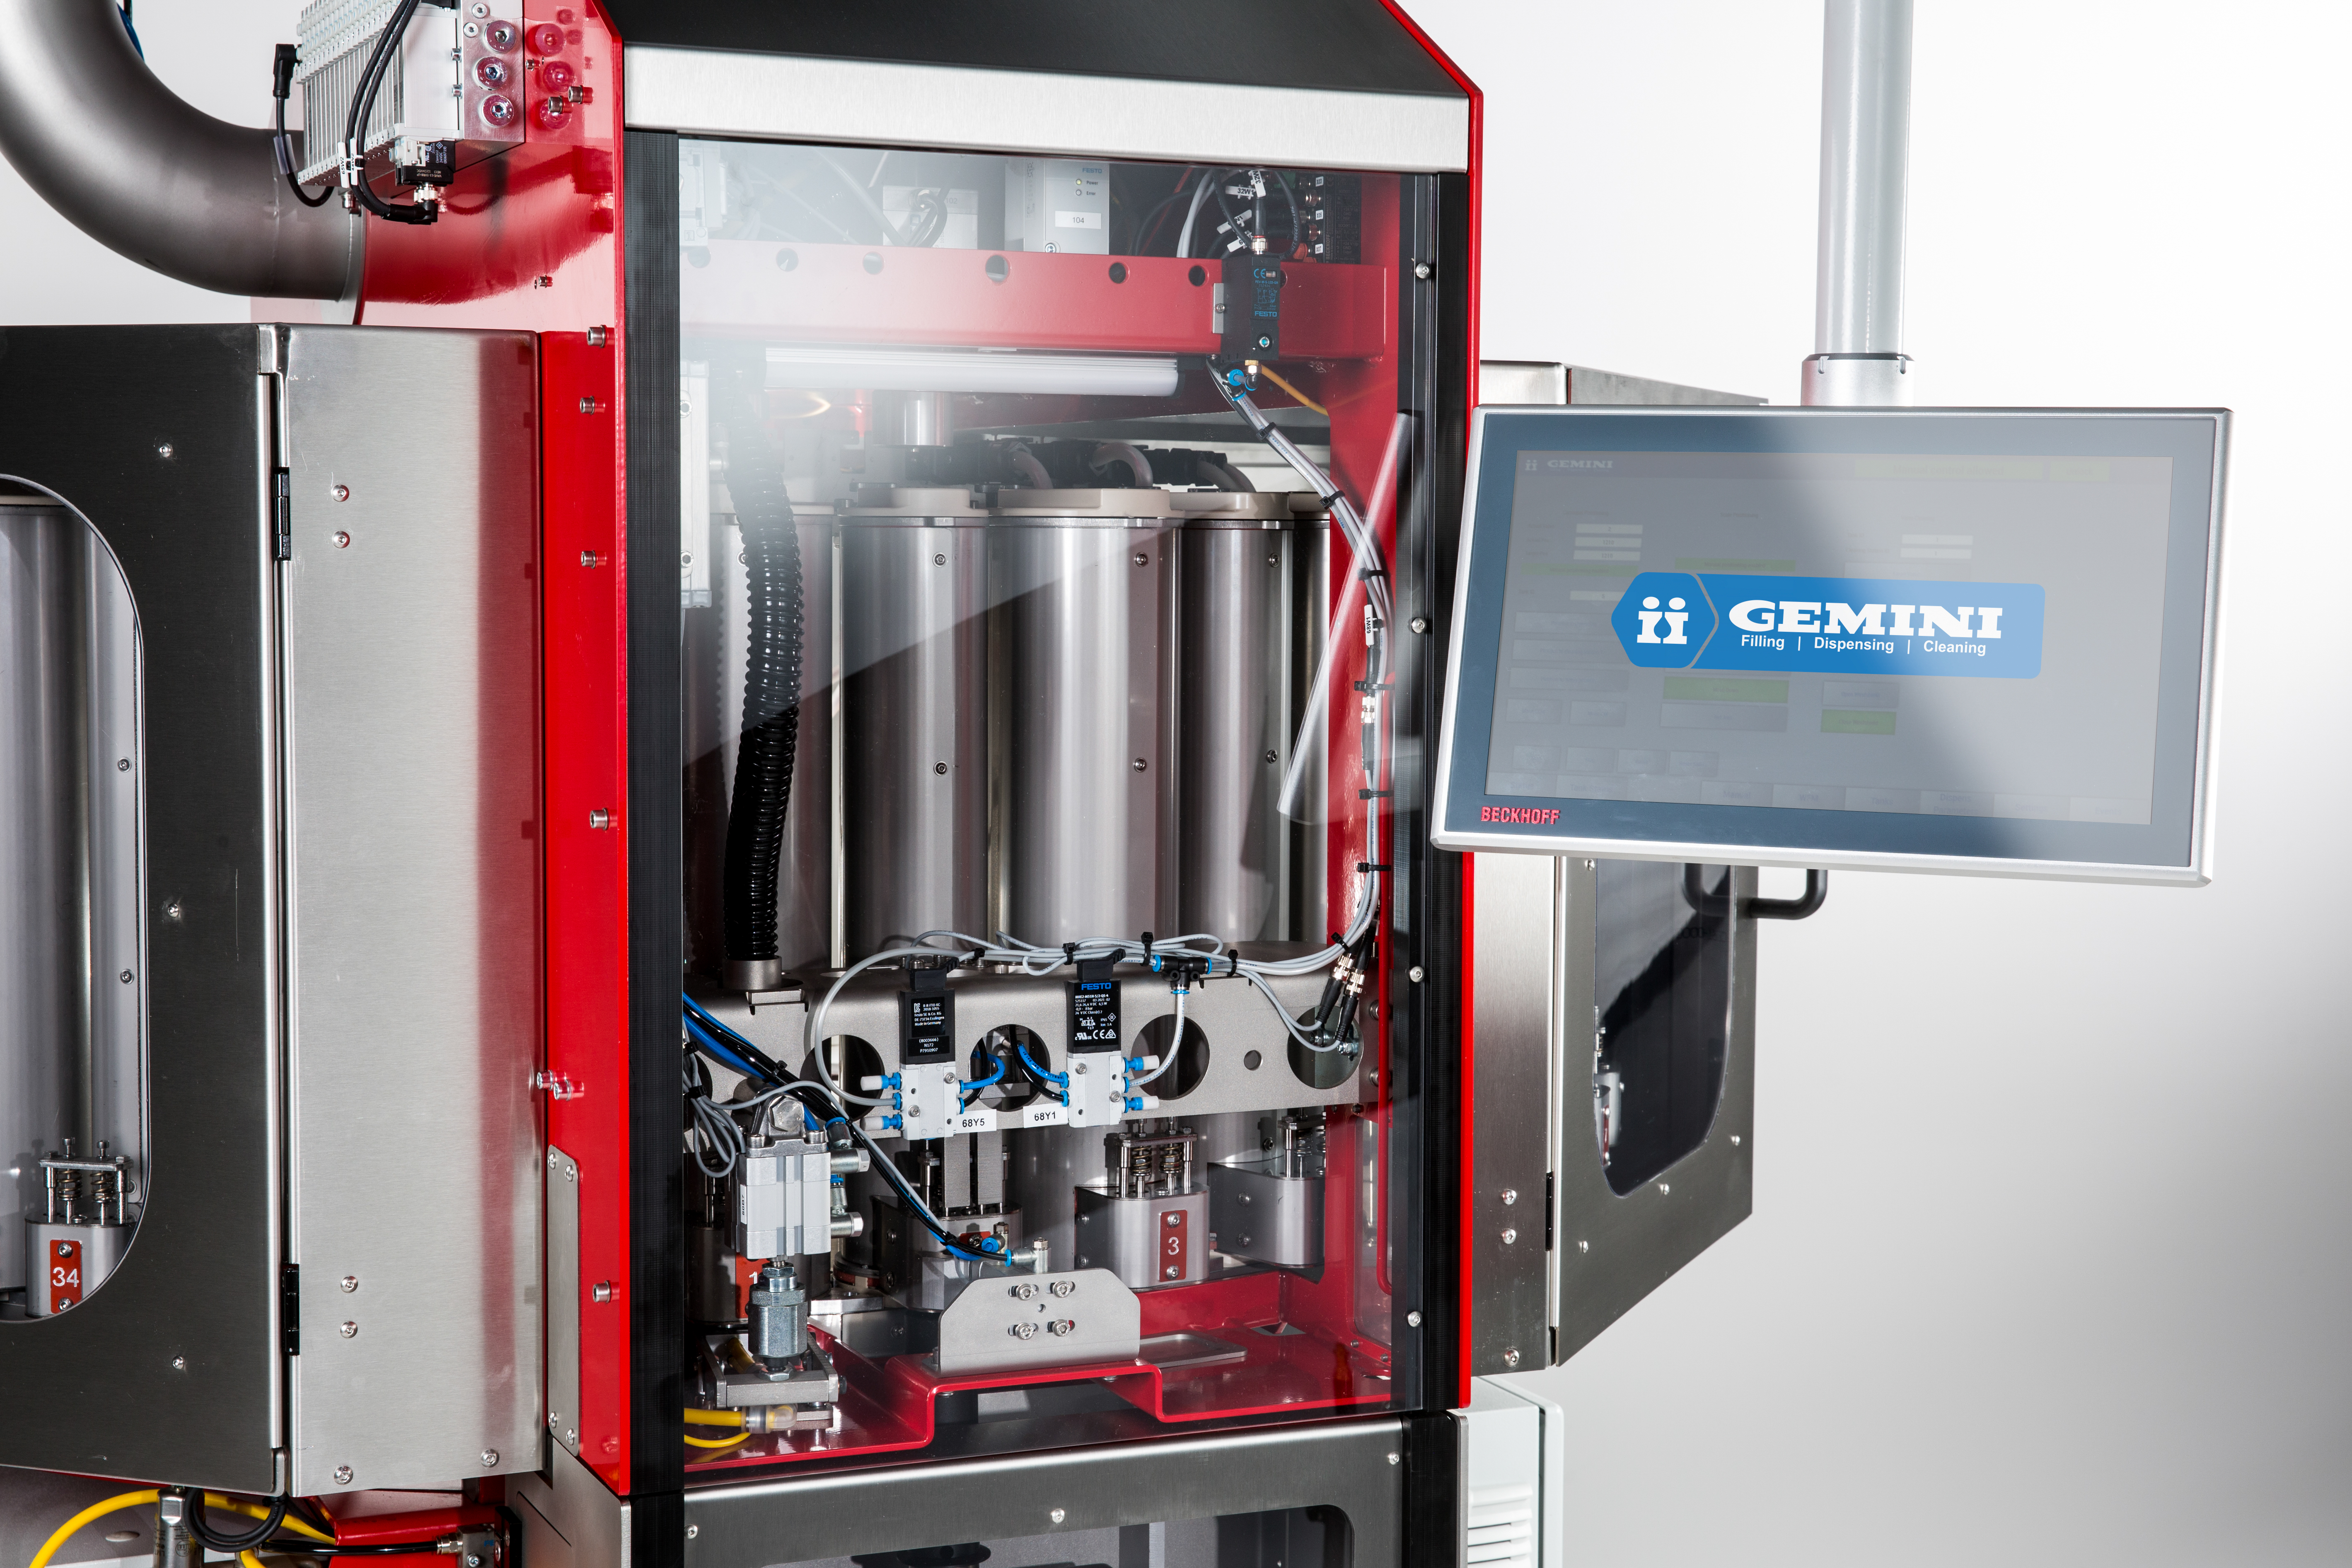 MicroDispenser MD - Gravimetric dispensing machine for small quantities with an extremely high accuracy - Gemini Techniek - 3